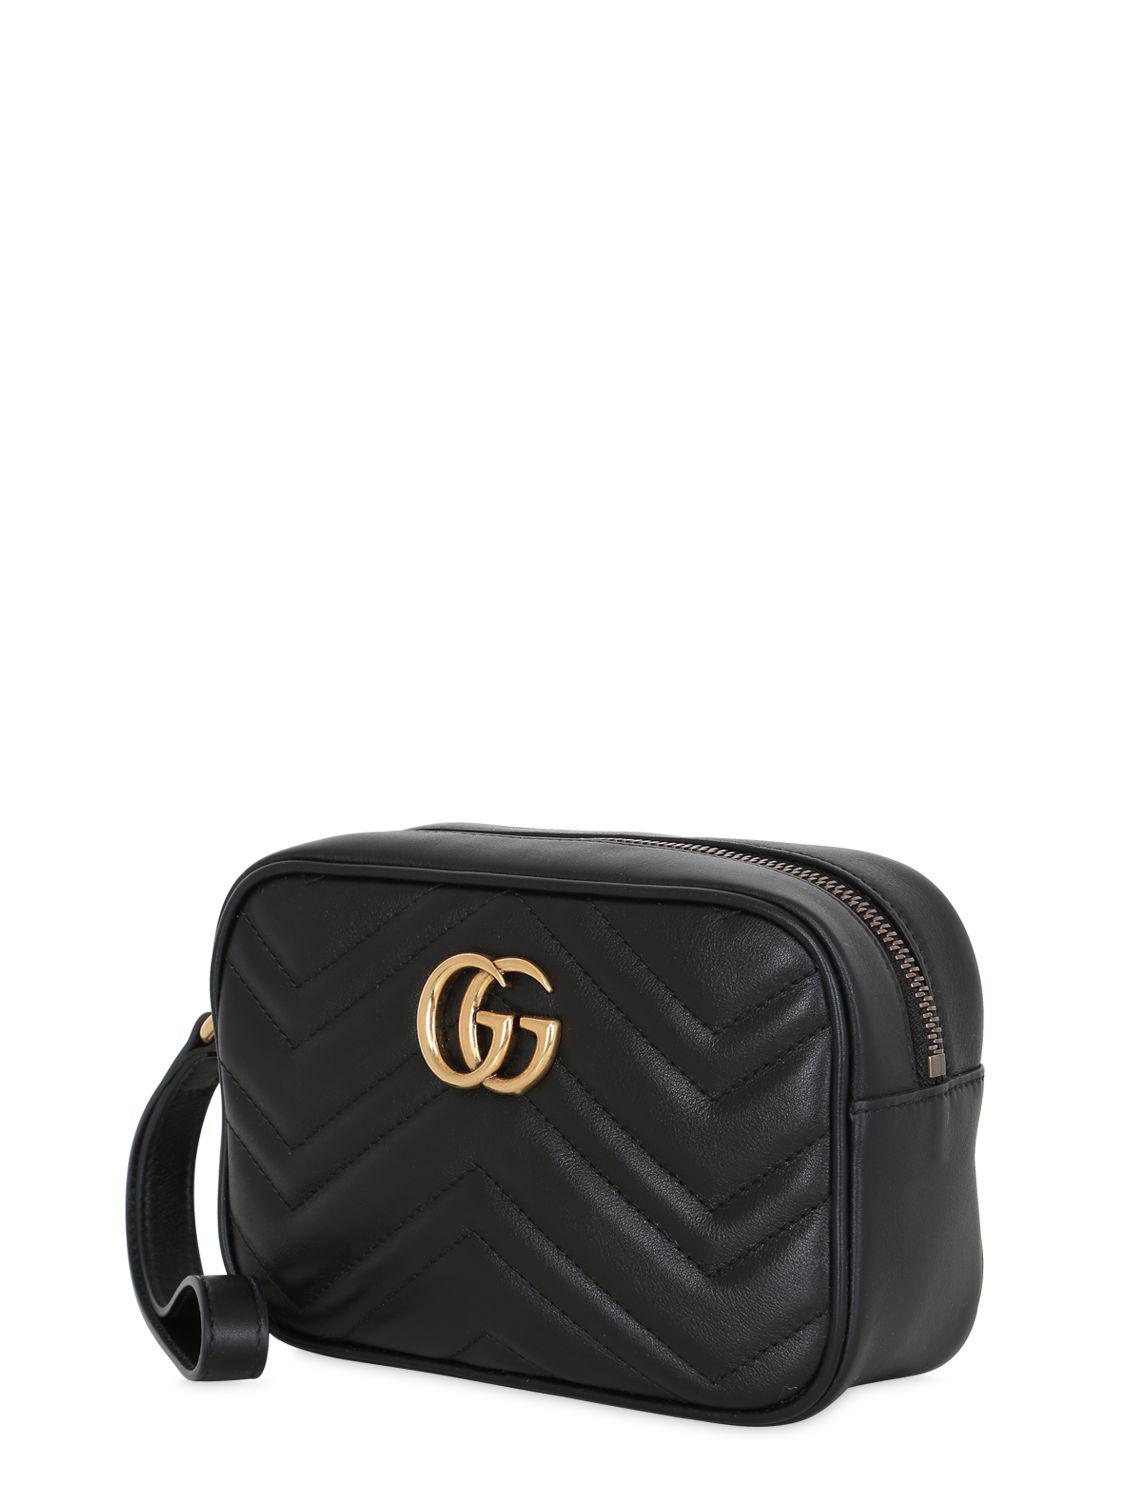 Gucci GG Marmont 2.0 Leather Shoulder Bag in Black - Lyst